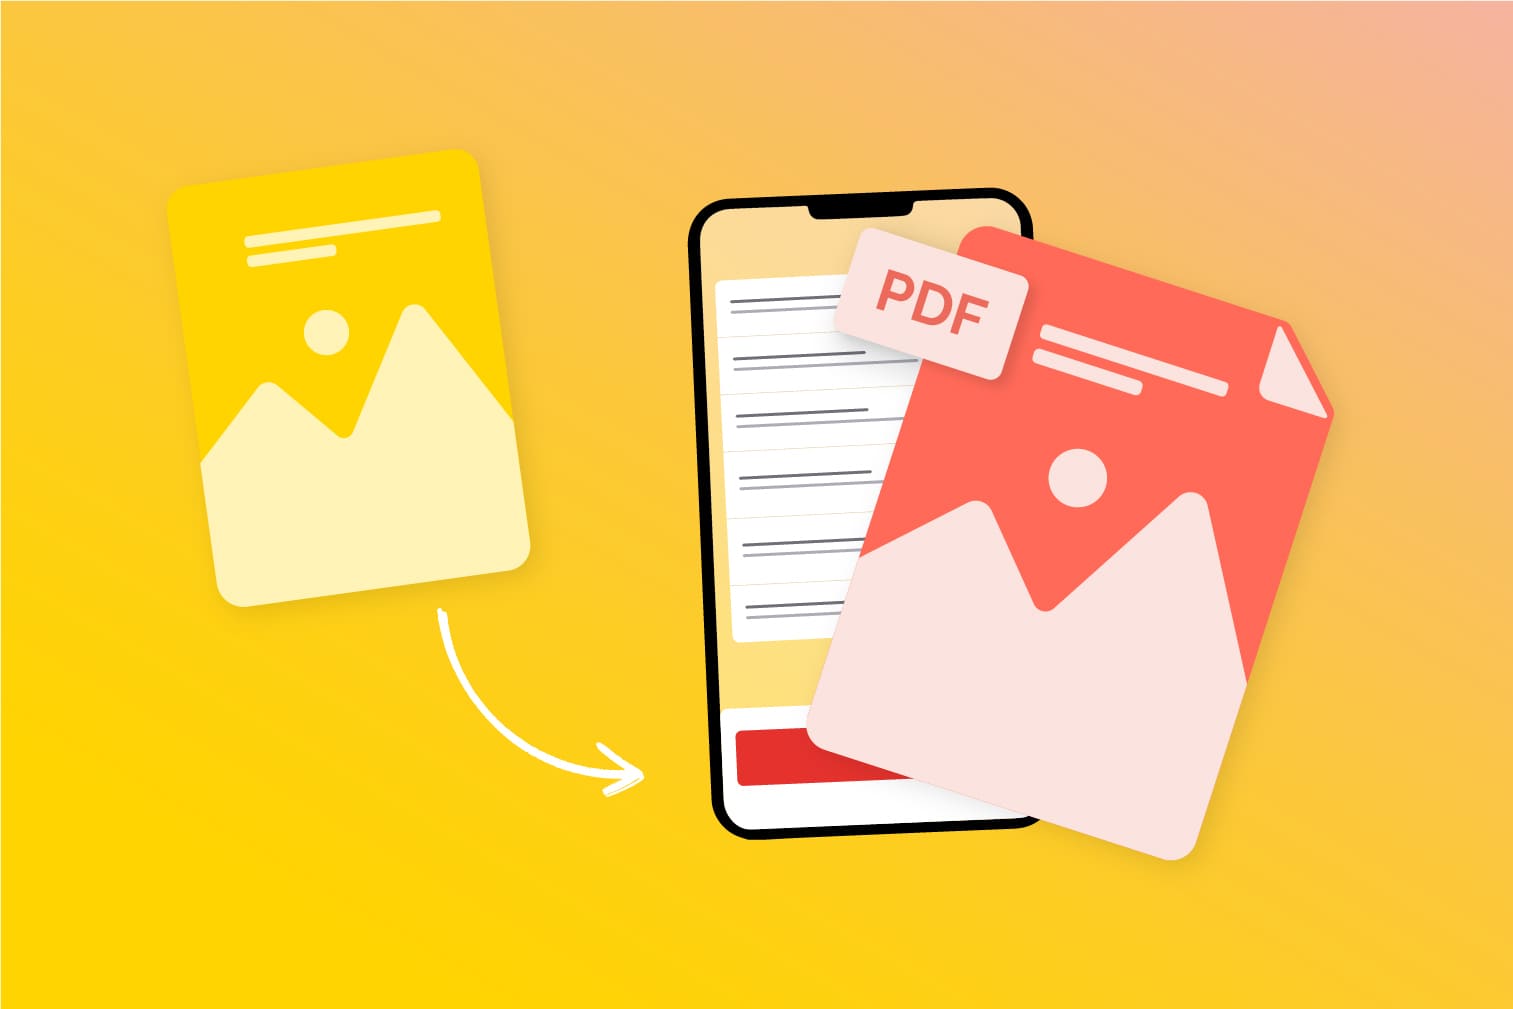 How to convert a picture to PDF on iPhone and Android